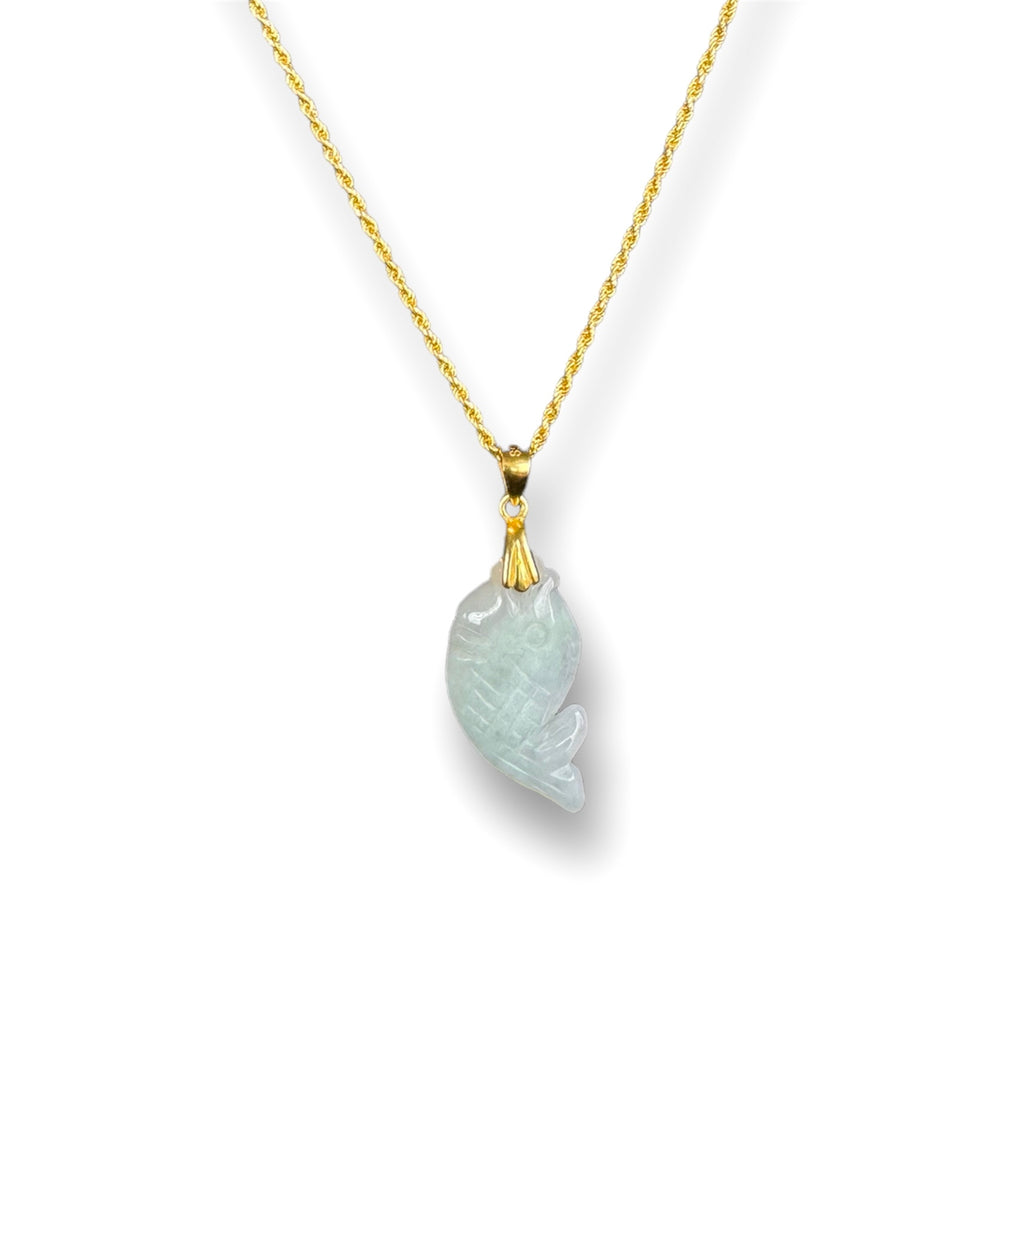 The Gold Lucky Fish Jade Necklace